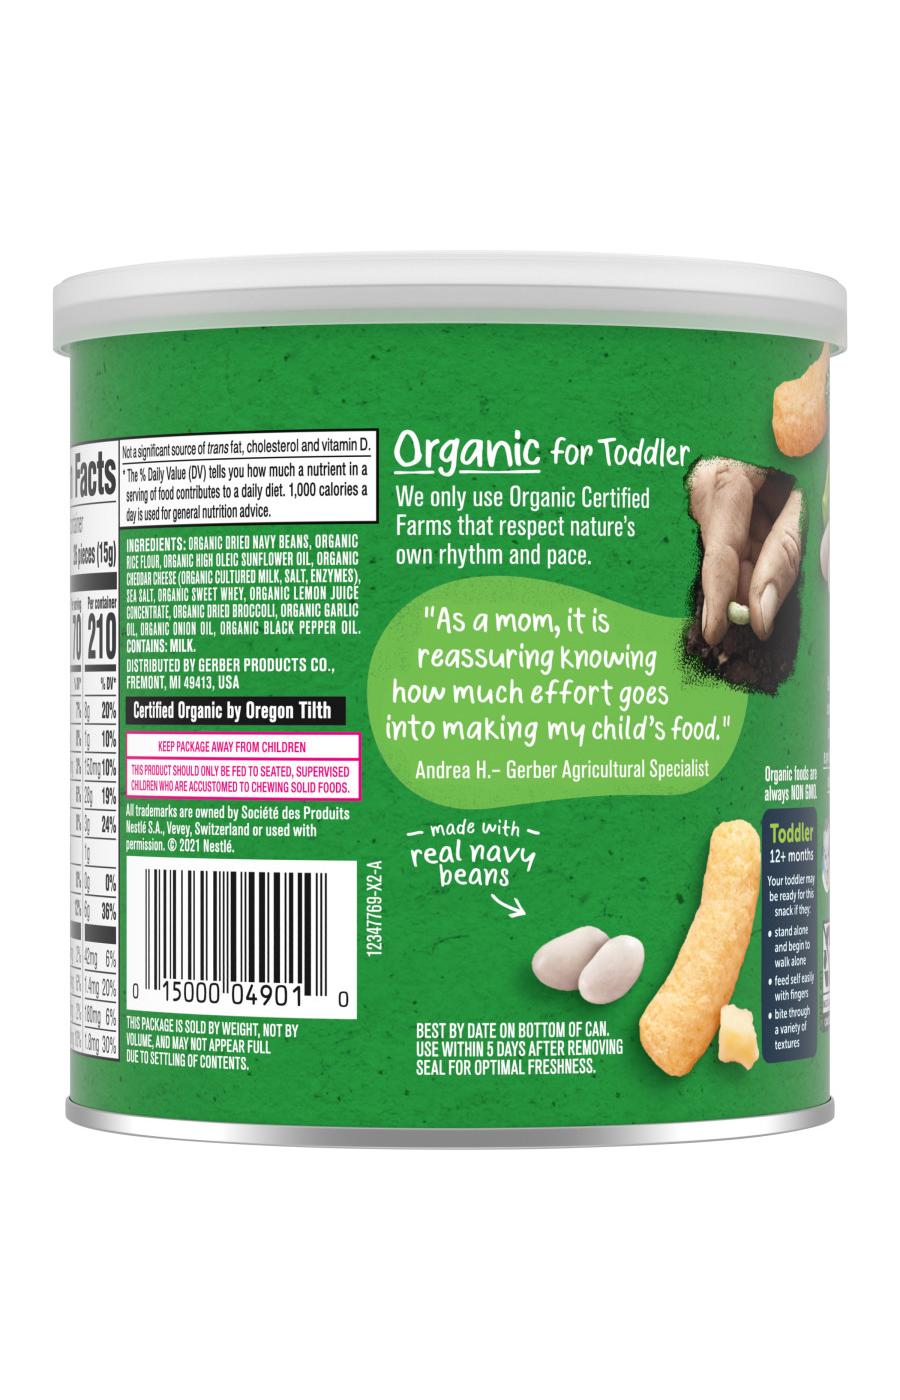 Gerber Organic for Toddler Lil' Crunchies - White Cheddar Broccoli; image 6 of 8